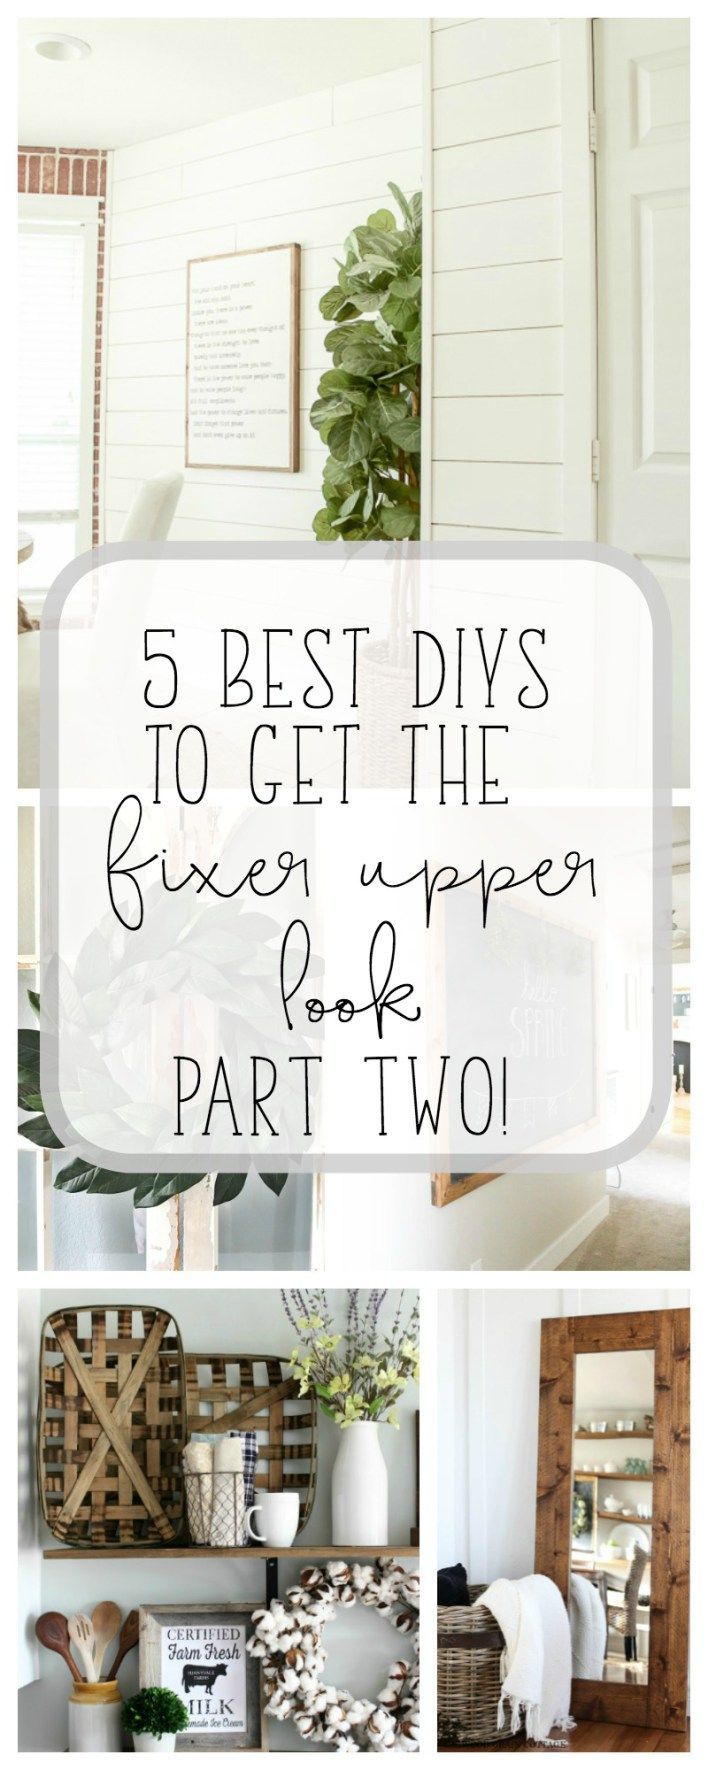 5 Best DIYs to get the Fixer Upper Look - Part Two! - -   24 farmhouse style on a budget
 ideas